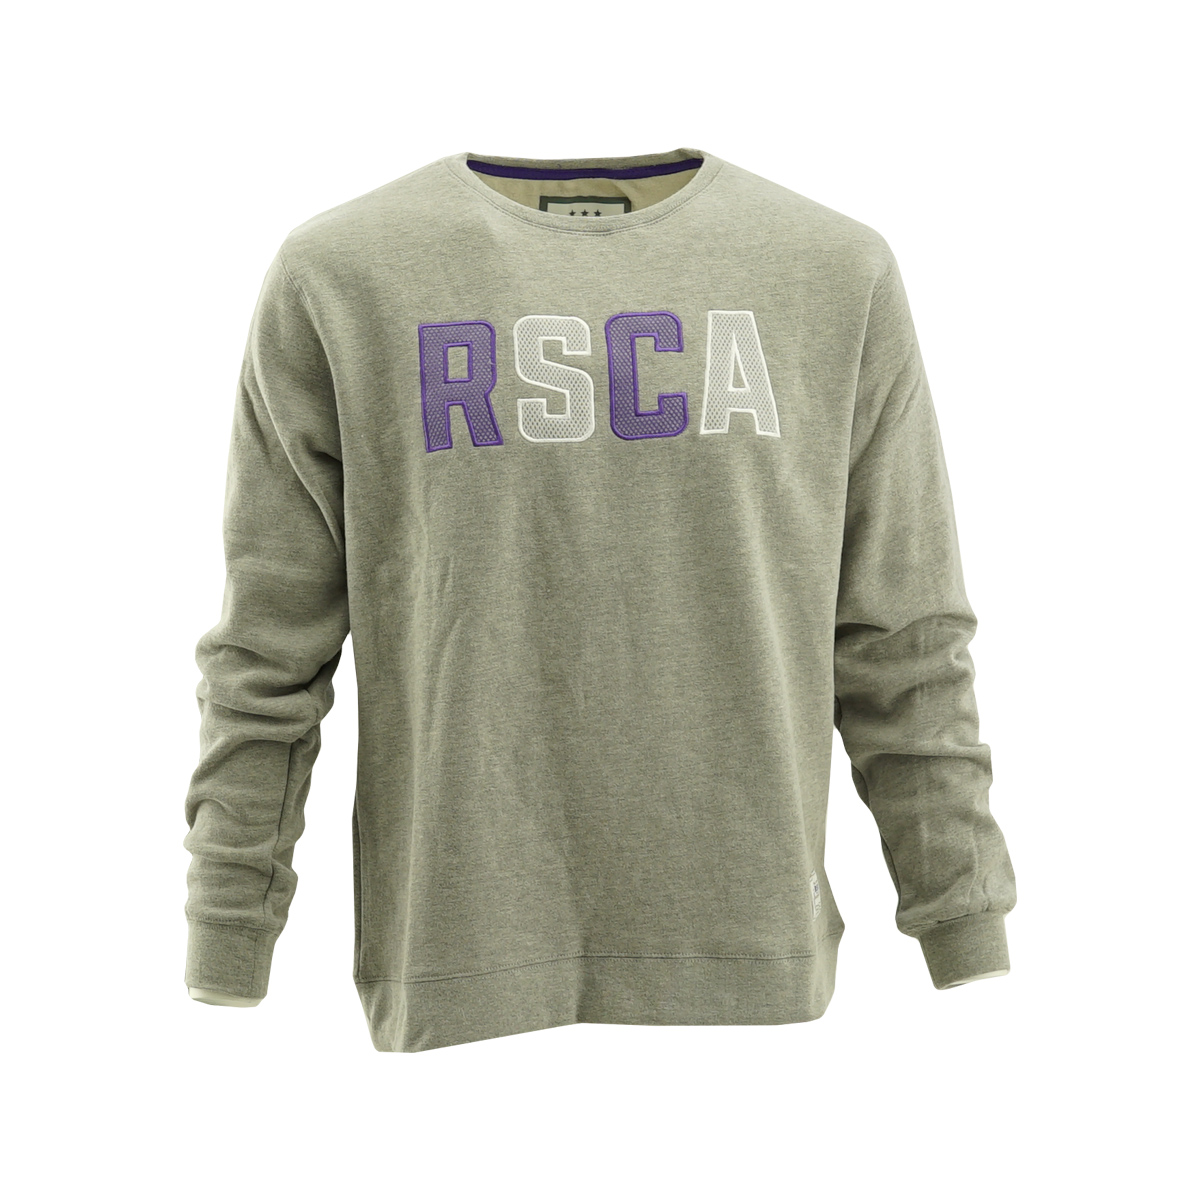 Sweater Heren RSCA Paars/Wit